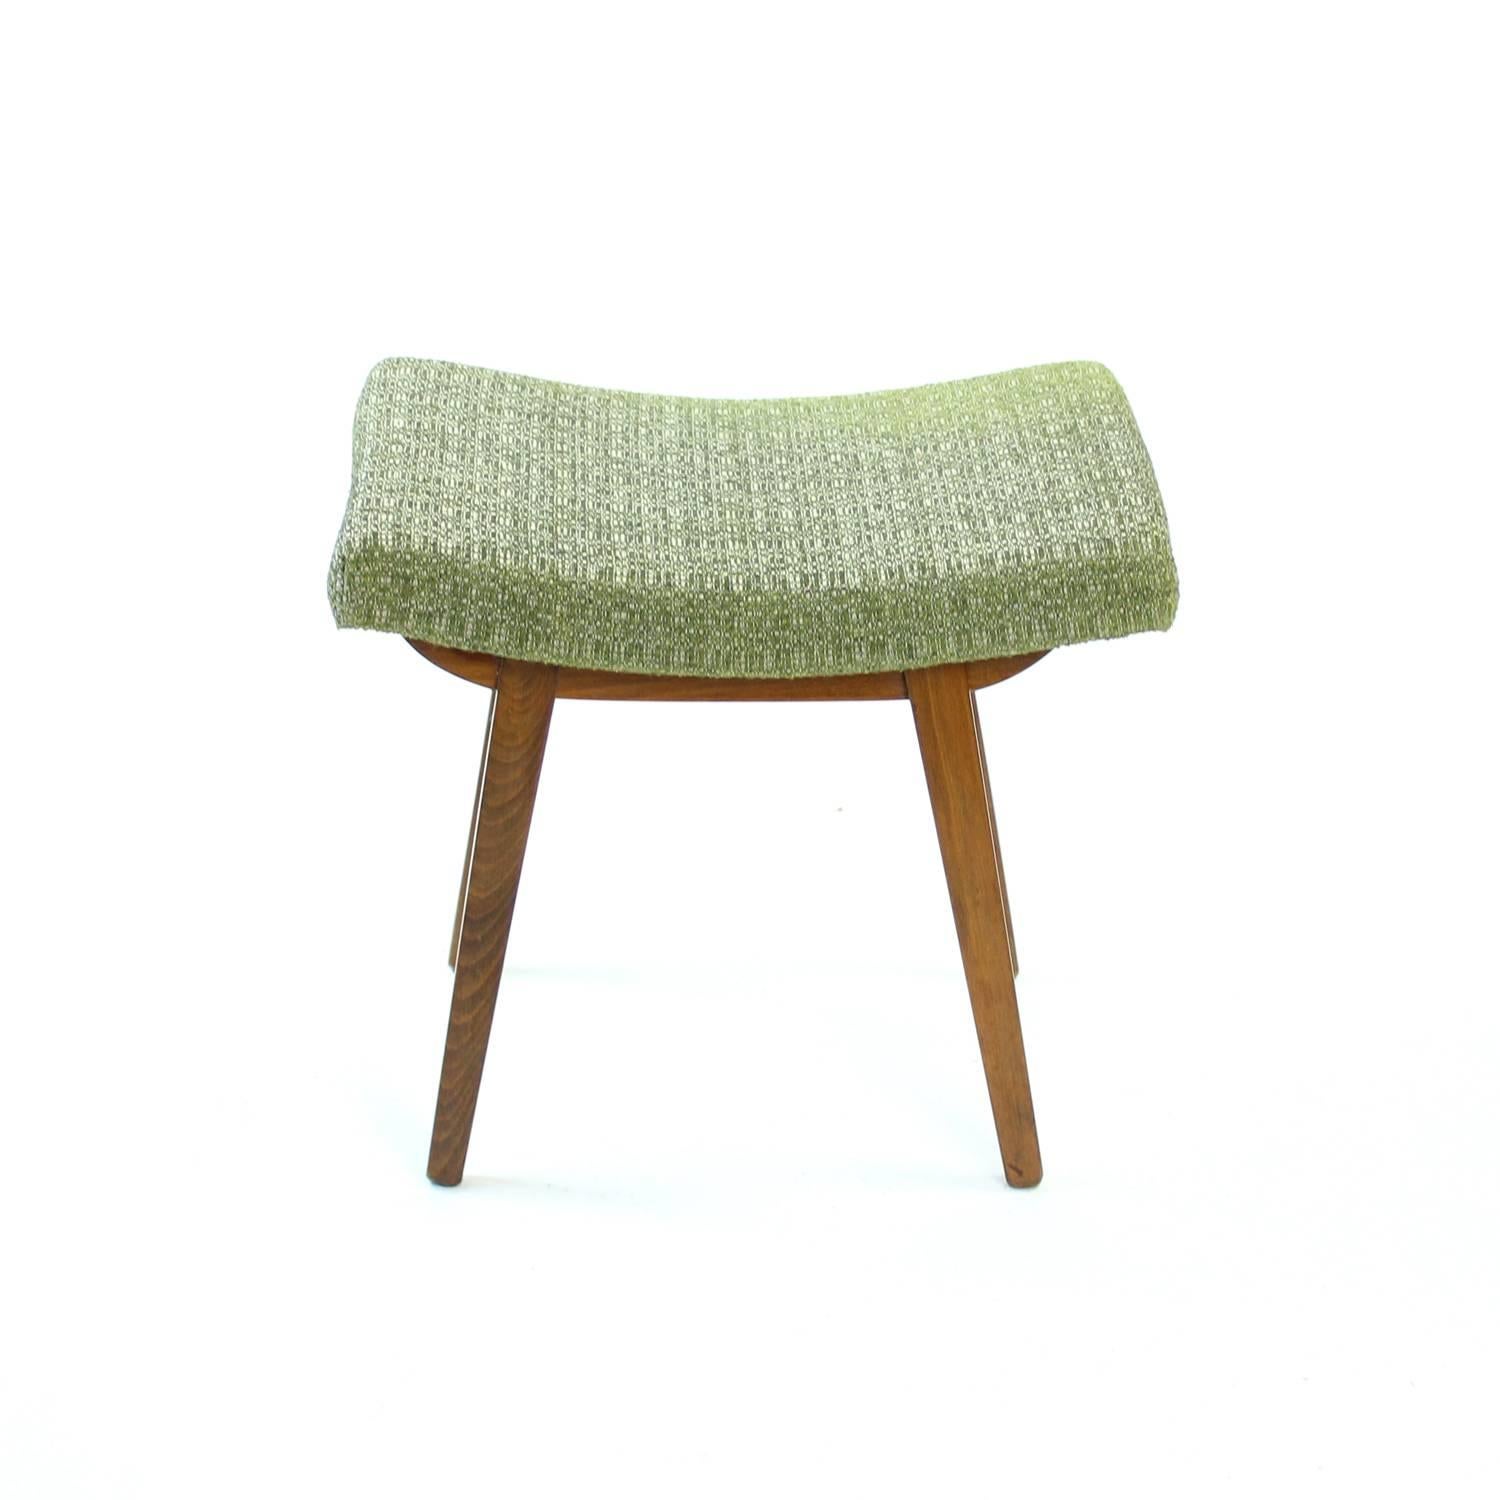 This simple and elegant foot stool will make your sitting much more confortable. The design of this item makes it ideal for any home, as the clean lines and shapes make the foot stool interesting even when it is not used. Original upholstery and